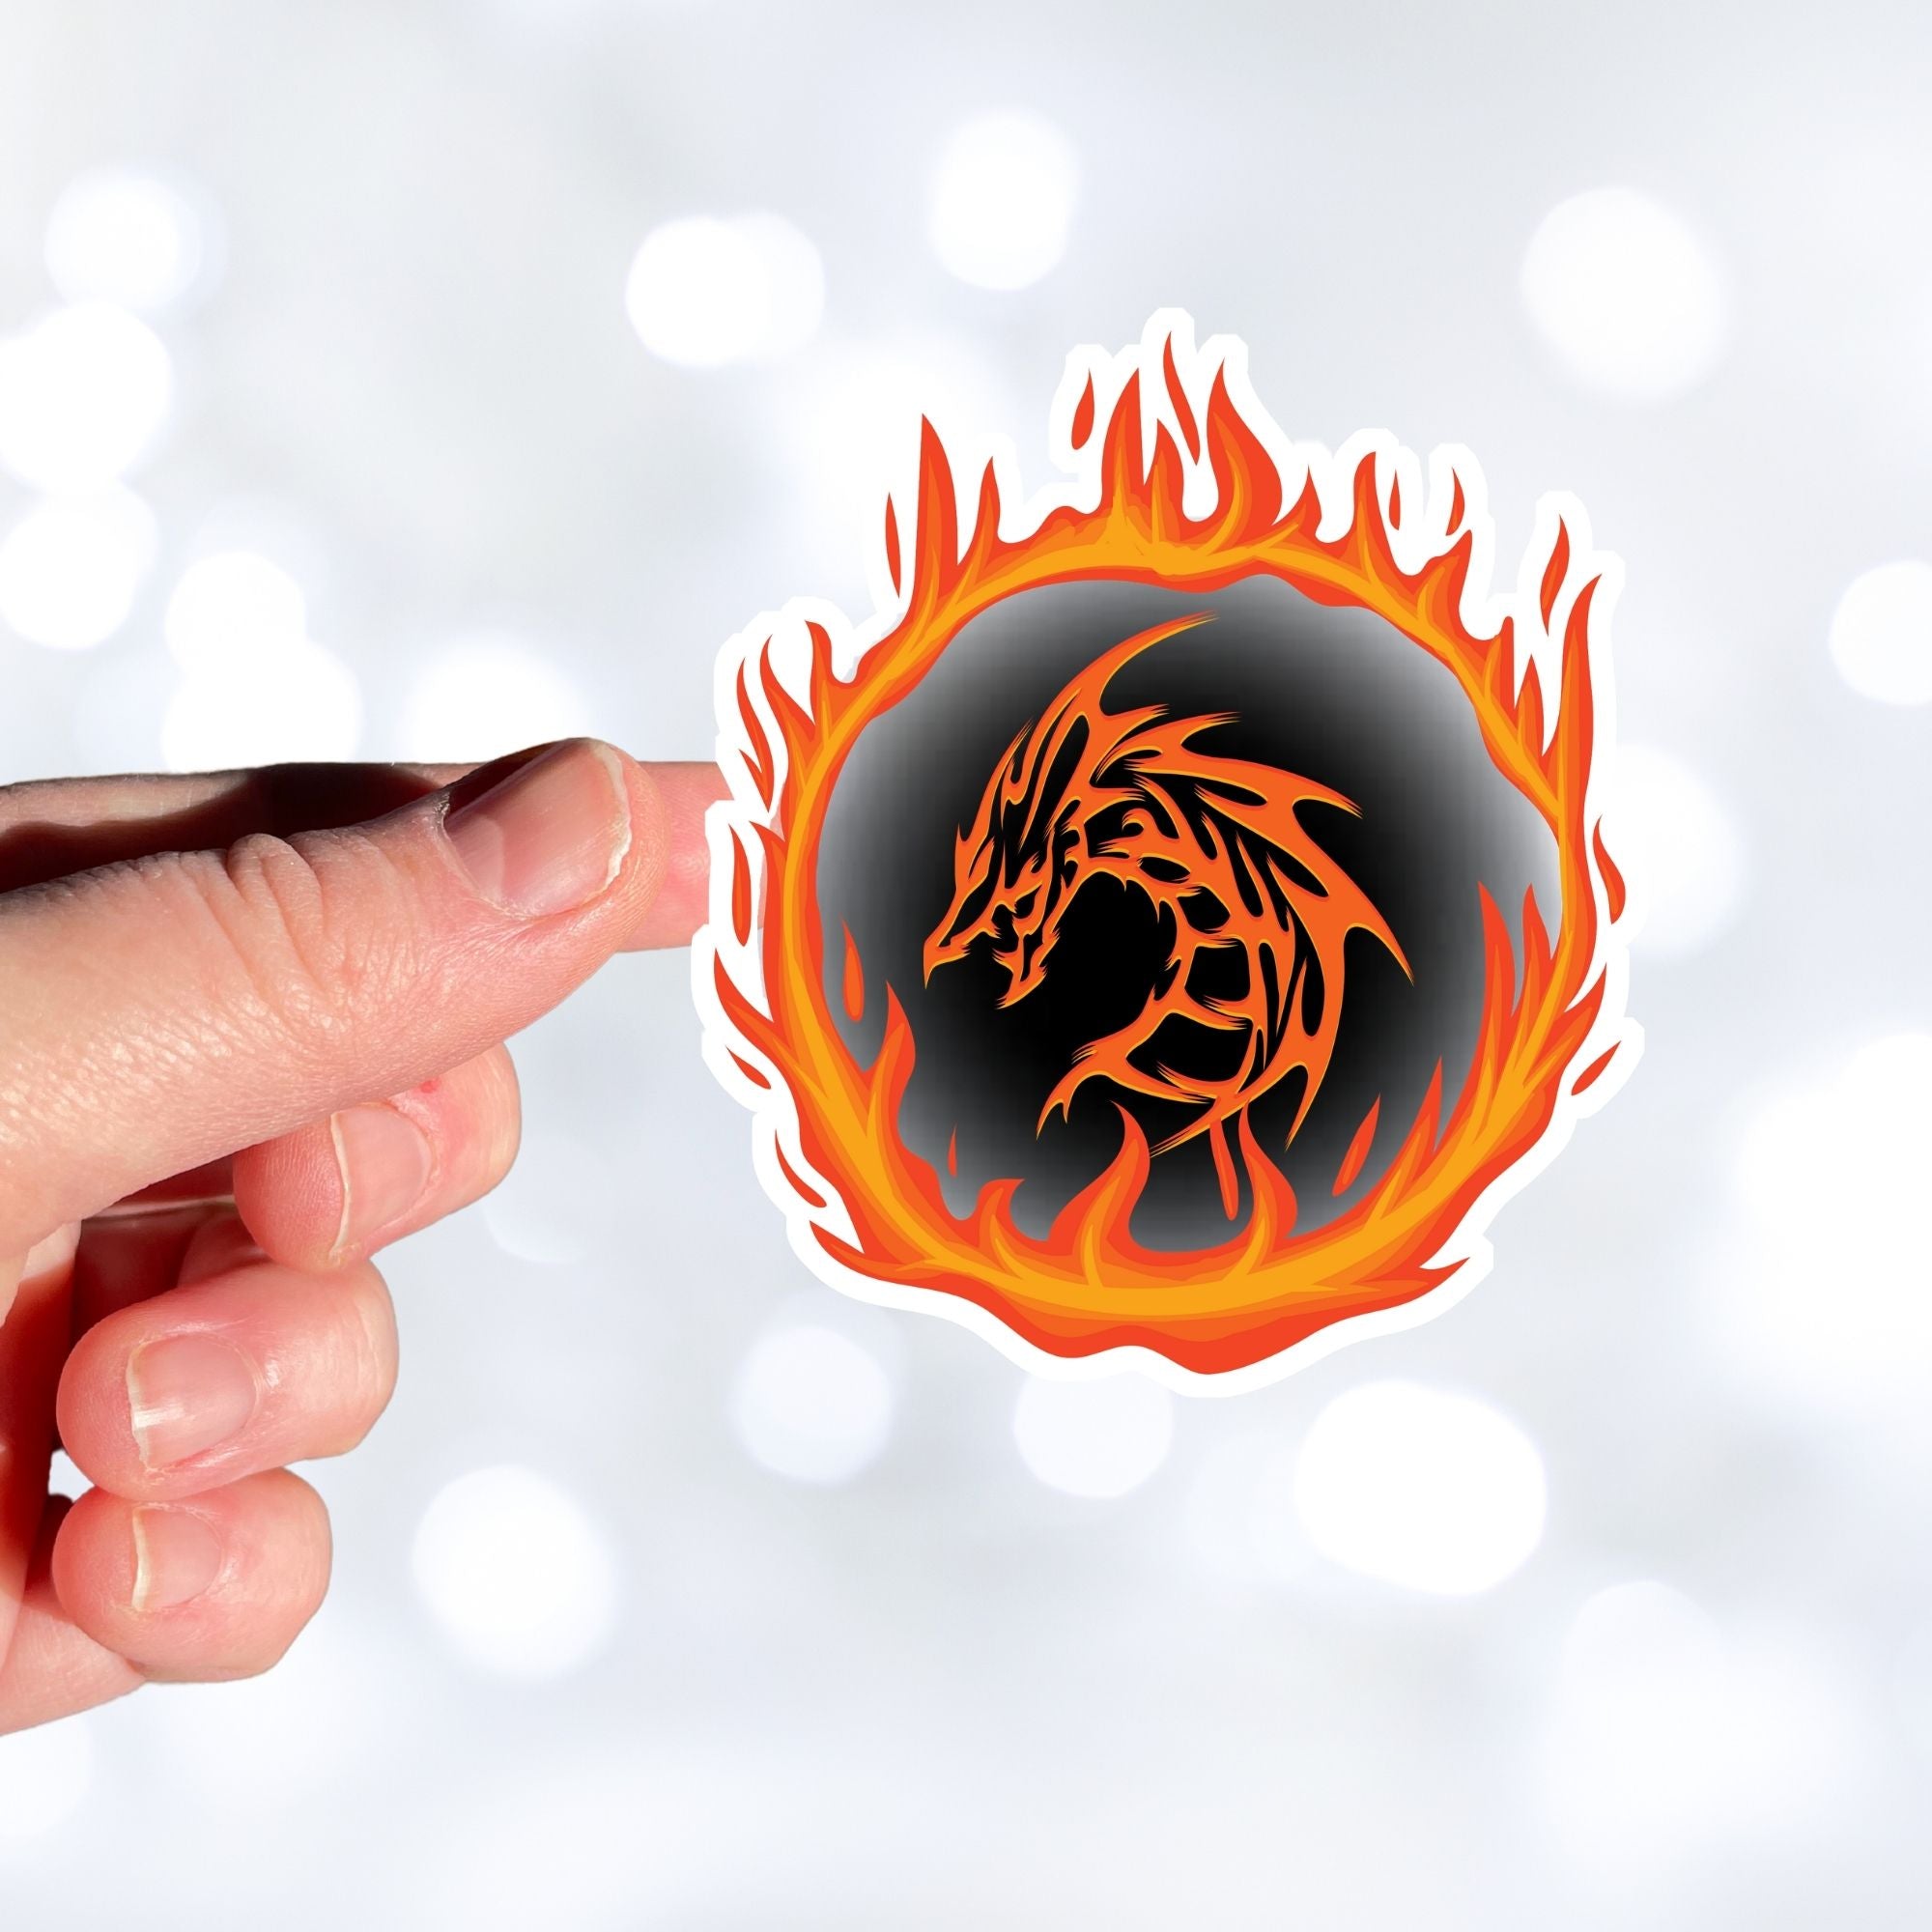 Who dares to disturb the Fire Dragon? This individual die-cut sticker features a fiery orange dragon surrounded by a ring of fire.  This image shows a hand holding the Fire Dragon sticker.